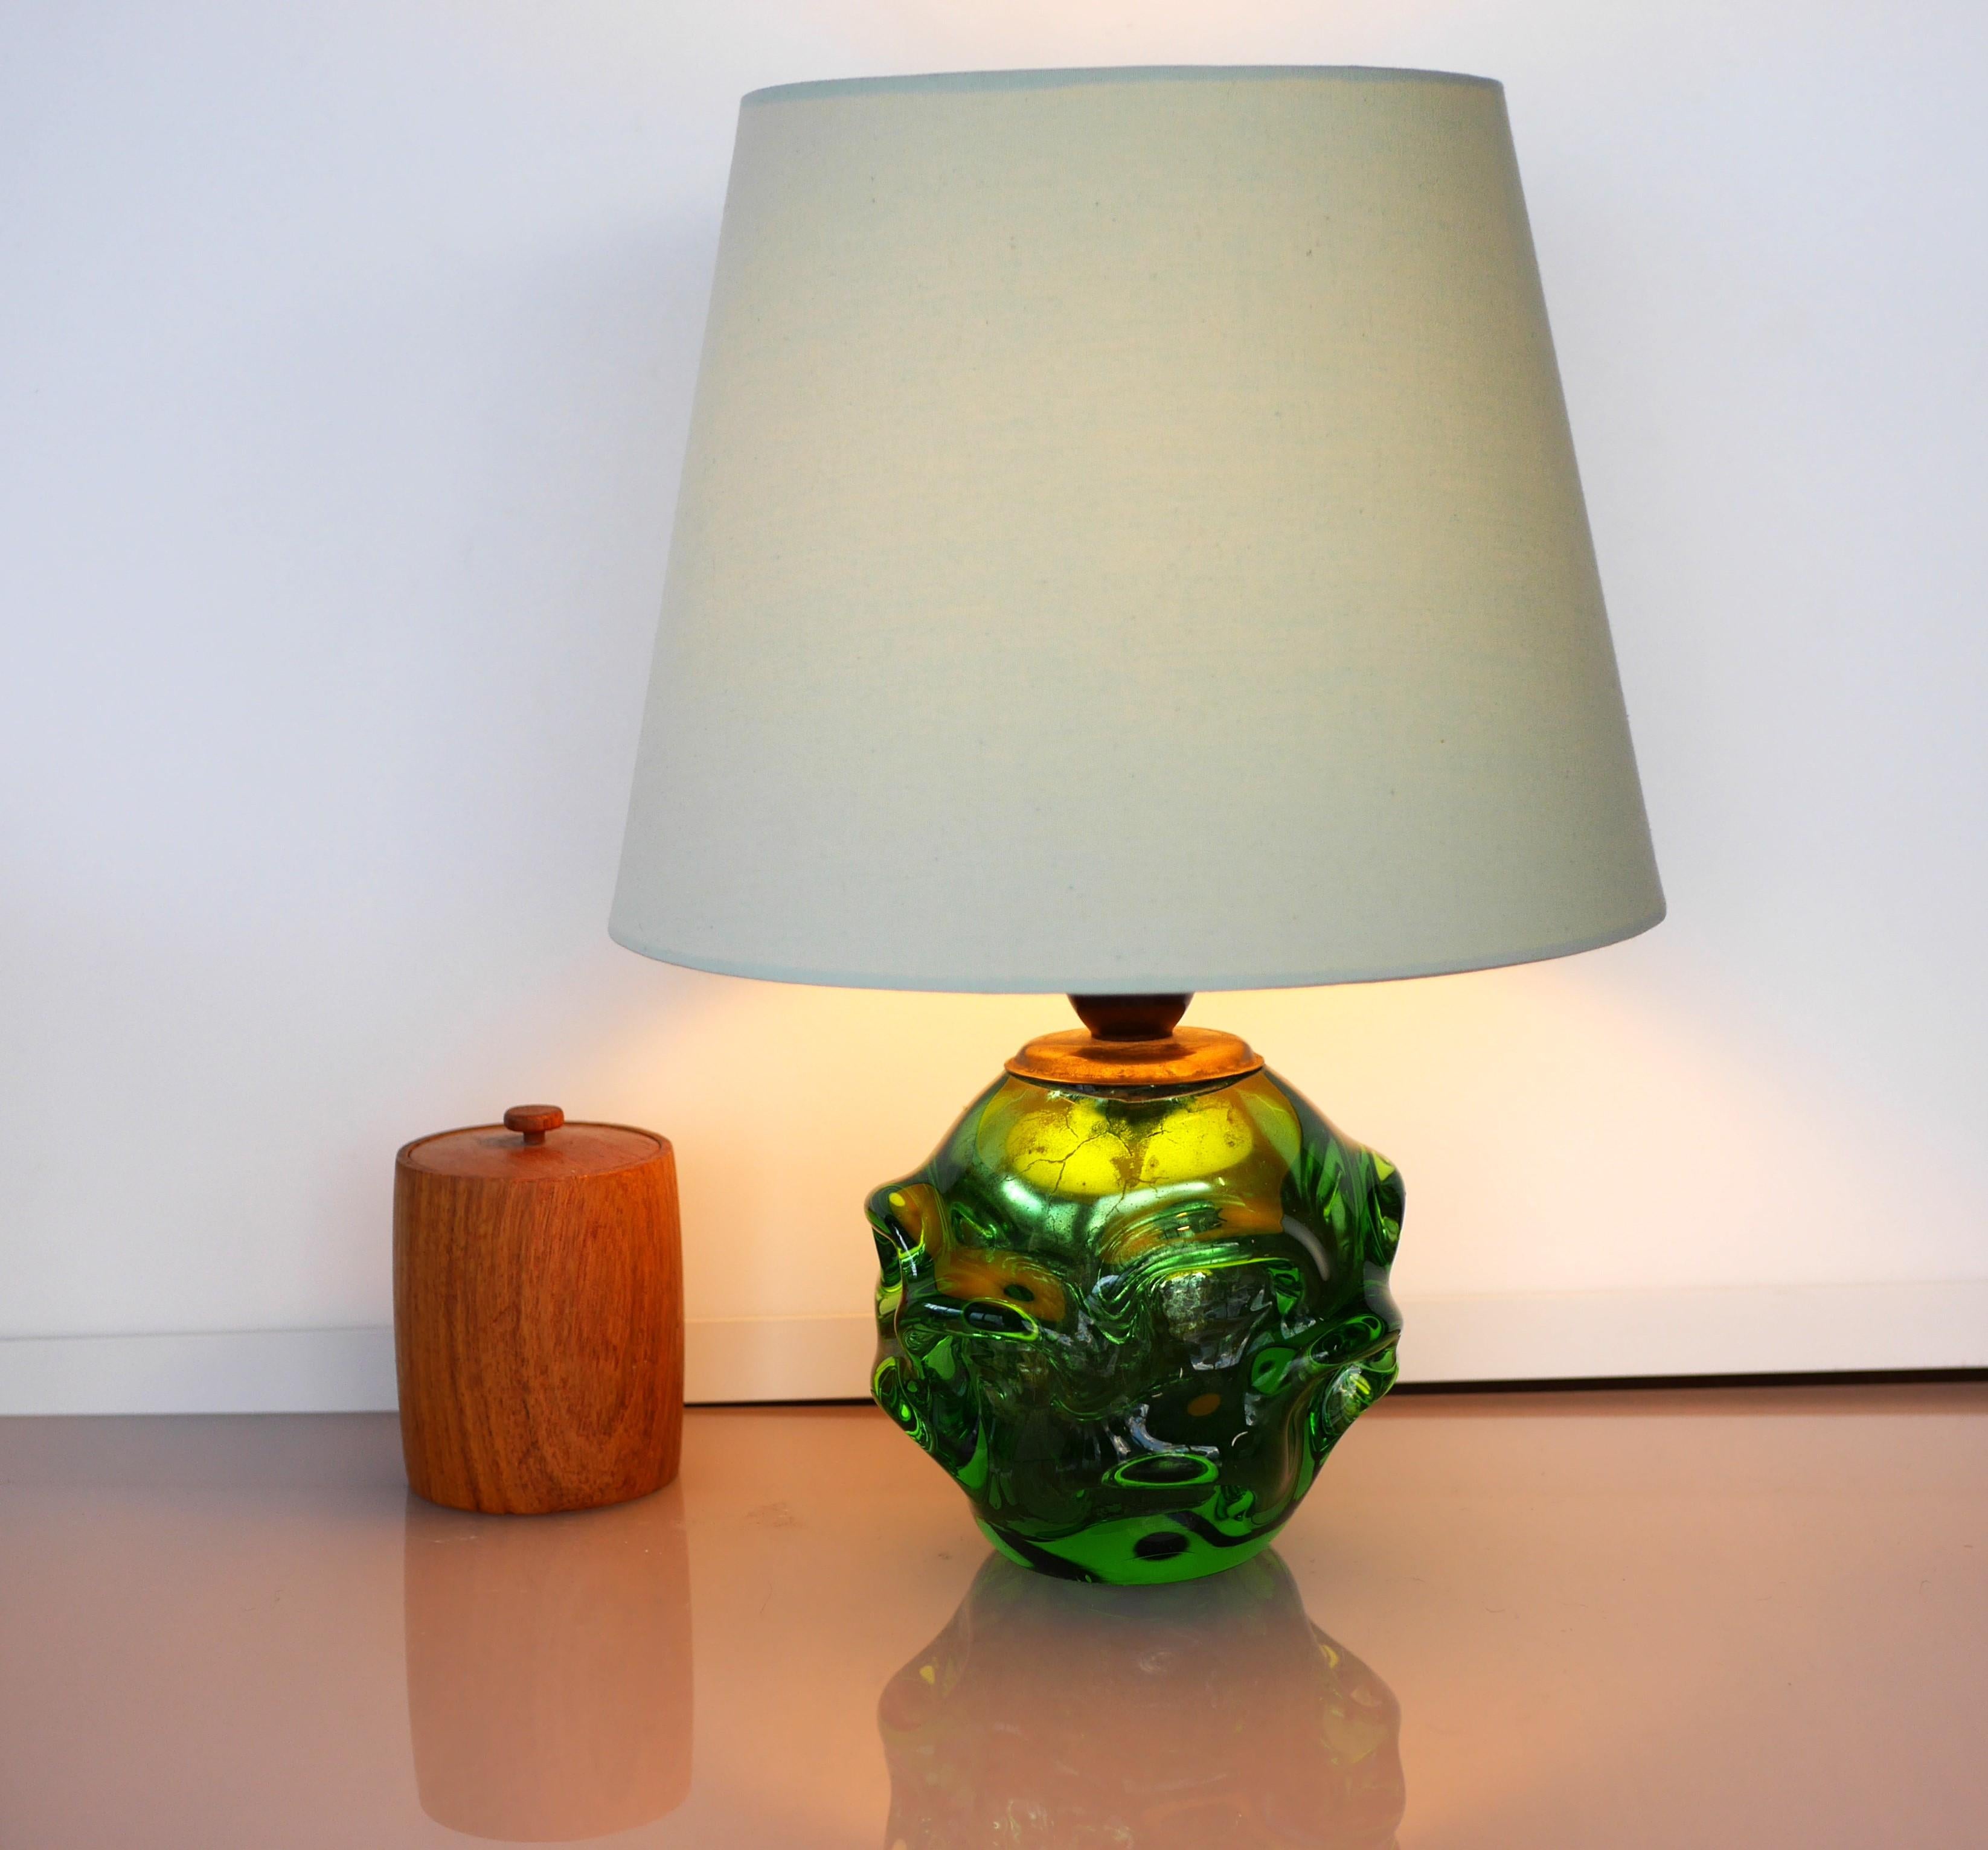 A gorgeous mid-century modern crystal lamp in a fantastic emerald green color, made by the talented Börne Augustsson for Åseda, Sweden during the 60s. The shape is very biomorphic yet it is the color that really makes this lamp so fantastic. This